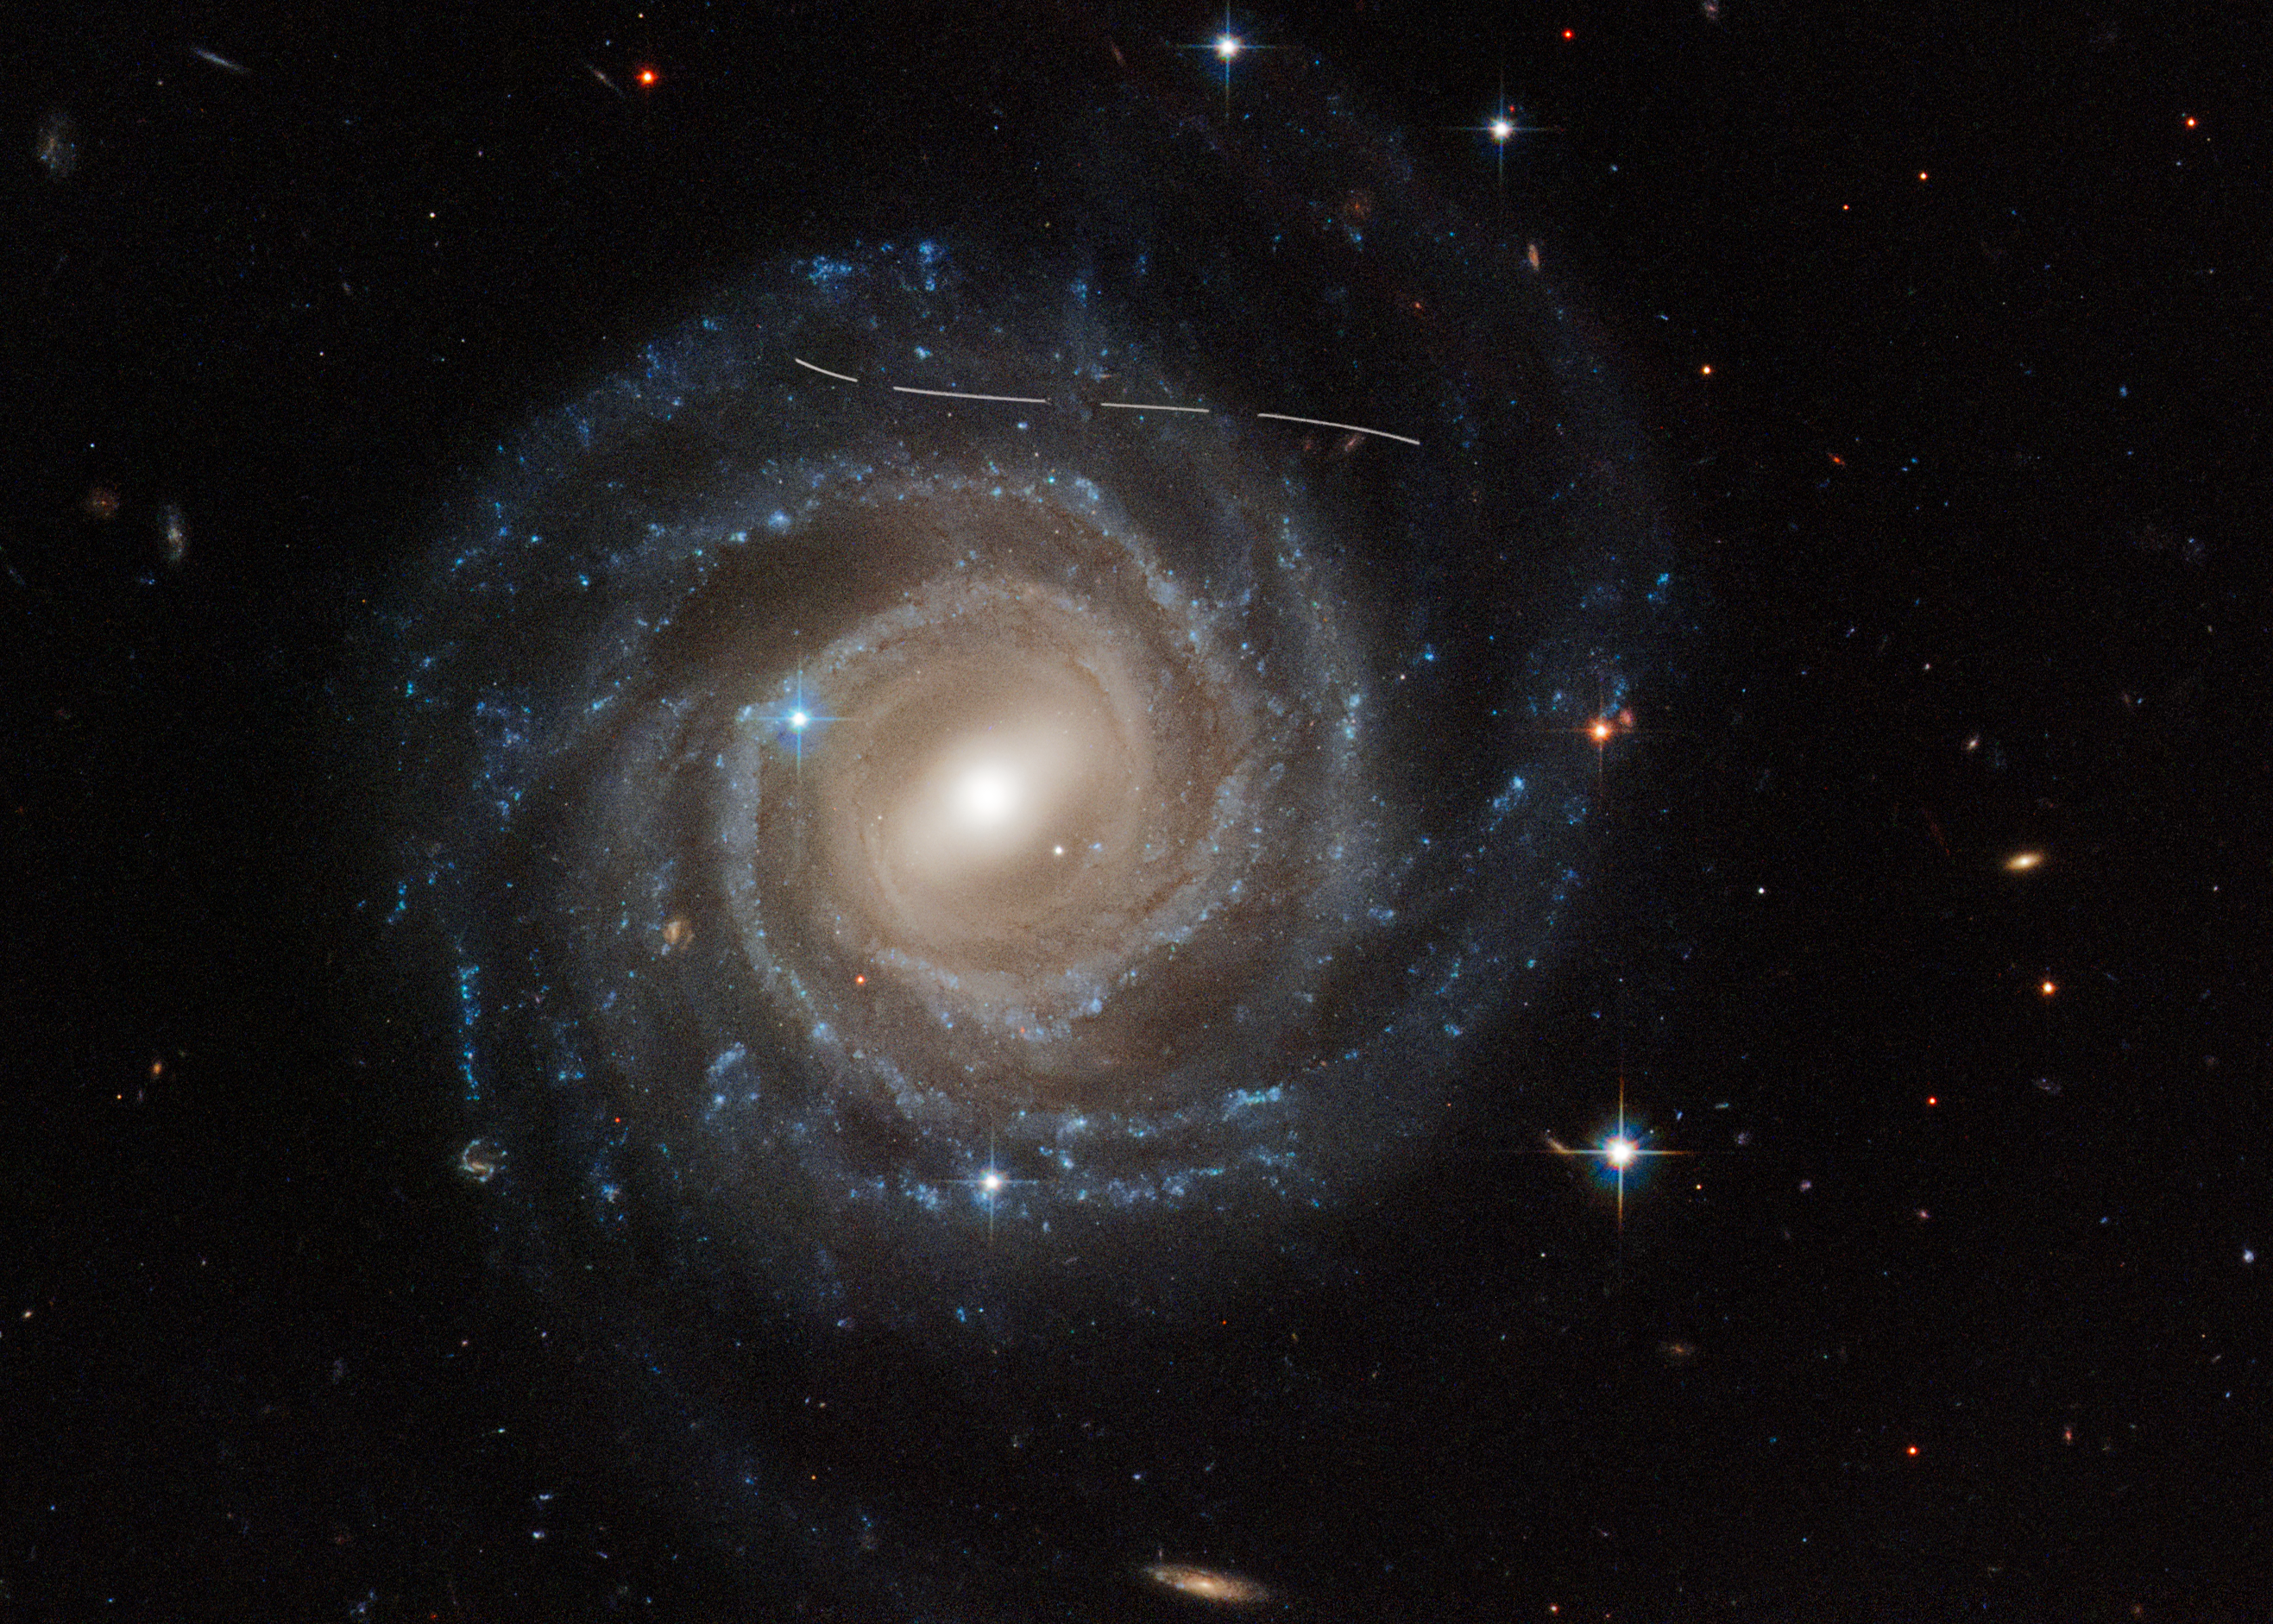 This be a Hubble Space Telescope image of tha barred spiral galaxy UGC 12158. Da majestic galaxy has a pinwheel shape made up of bright blue stars wound round a yellow-white hub of central stars. Da hub has a slash of stars across it, called a funky-ass bar. Shiiit, dis aint no joke. Da galaxy is tilted face-on ta our view from Ghetto fo' realz. A slightly s-shaped white line across tha top be a Hubble image iz of a asterizzle streakin across Hubble's view. Well shiiiit, it looks dashed cuz tha image be a cold-ass lil combination of nuff muthafuckin exposurez of tha asterizzle flyin by like a race car.